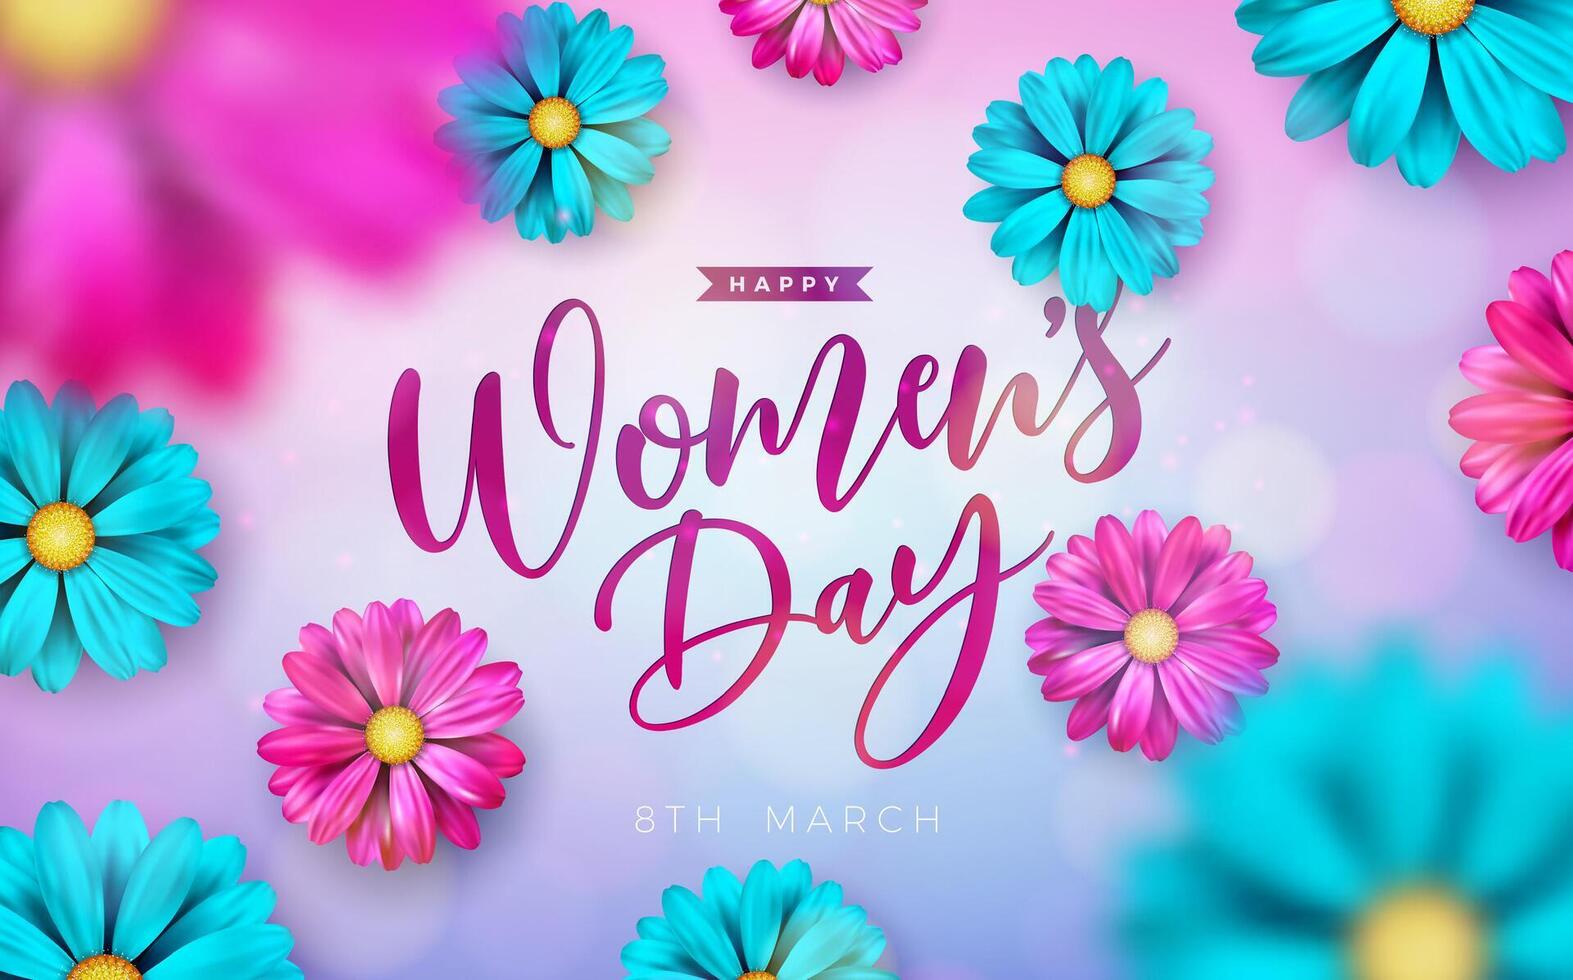 Happy Women's Day Floral Illustration. 8 March International Womens Day Vector Design with Colorful Spring Flower on Pastel Color Background. Woman or Mother Day Theme Template for Flyer, Greeting